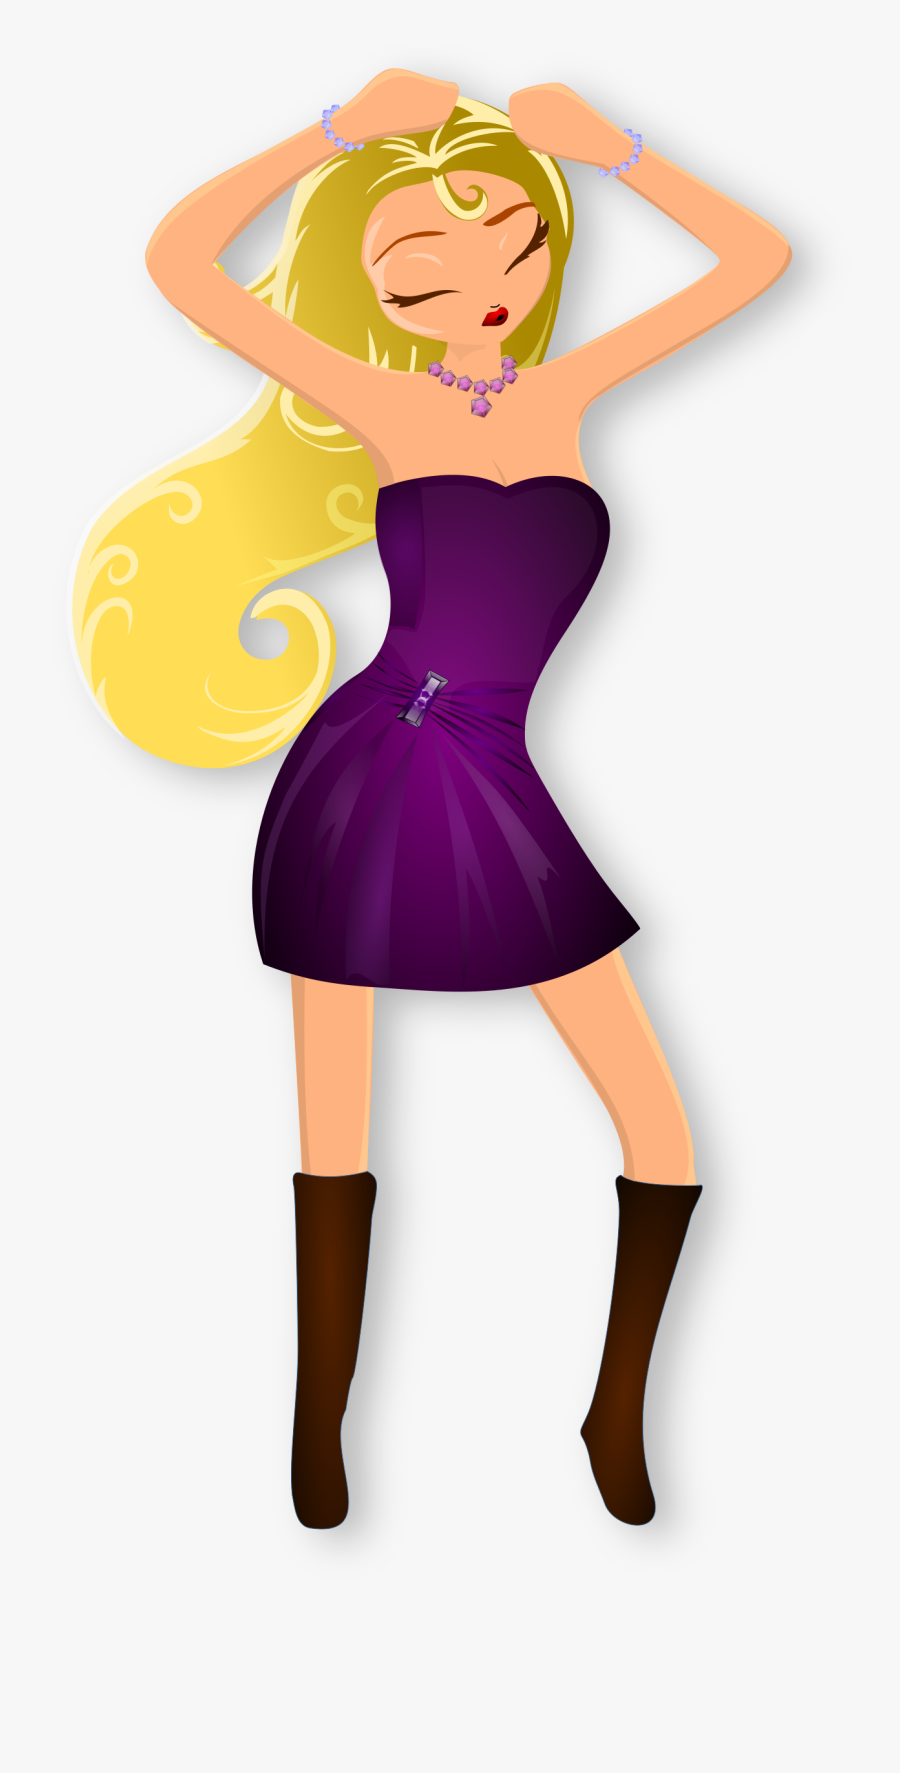 Royalty Free Girl Dancing Clipart - Clipart Lady Dancing, Transparent Clipart